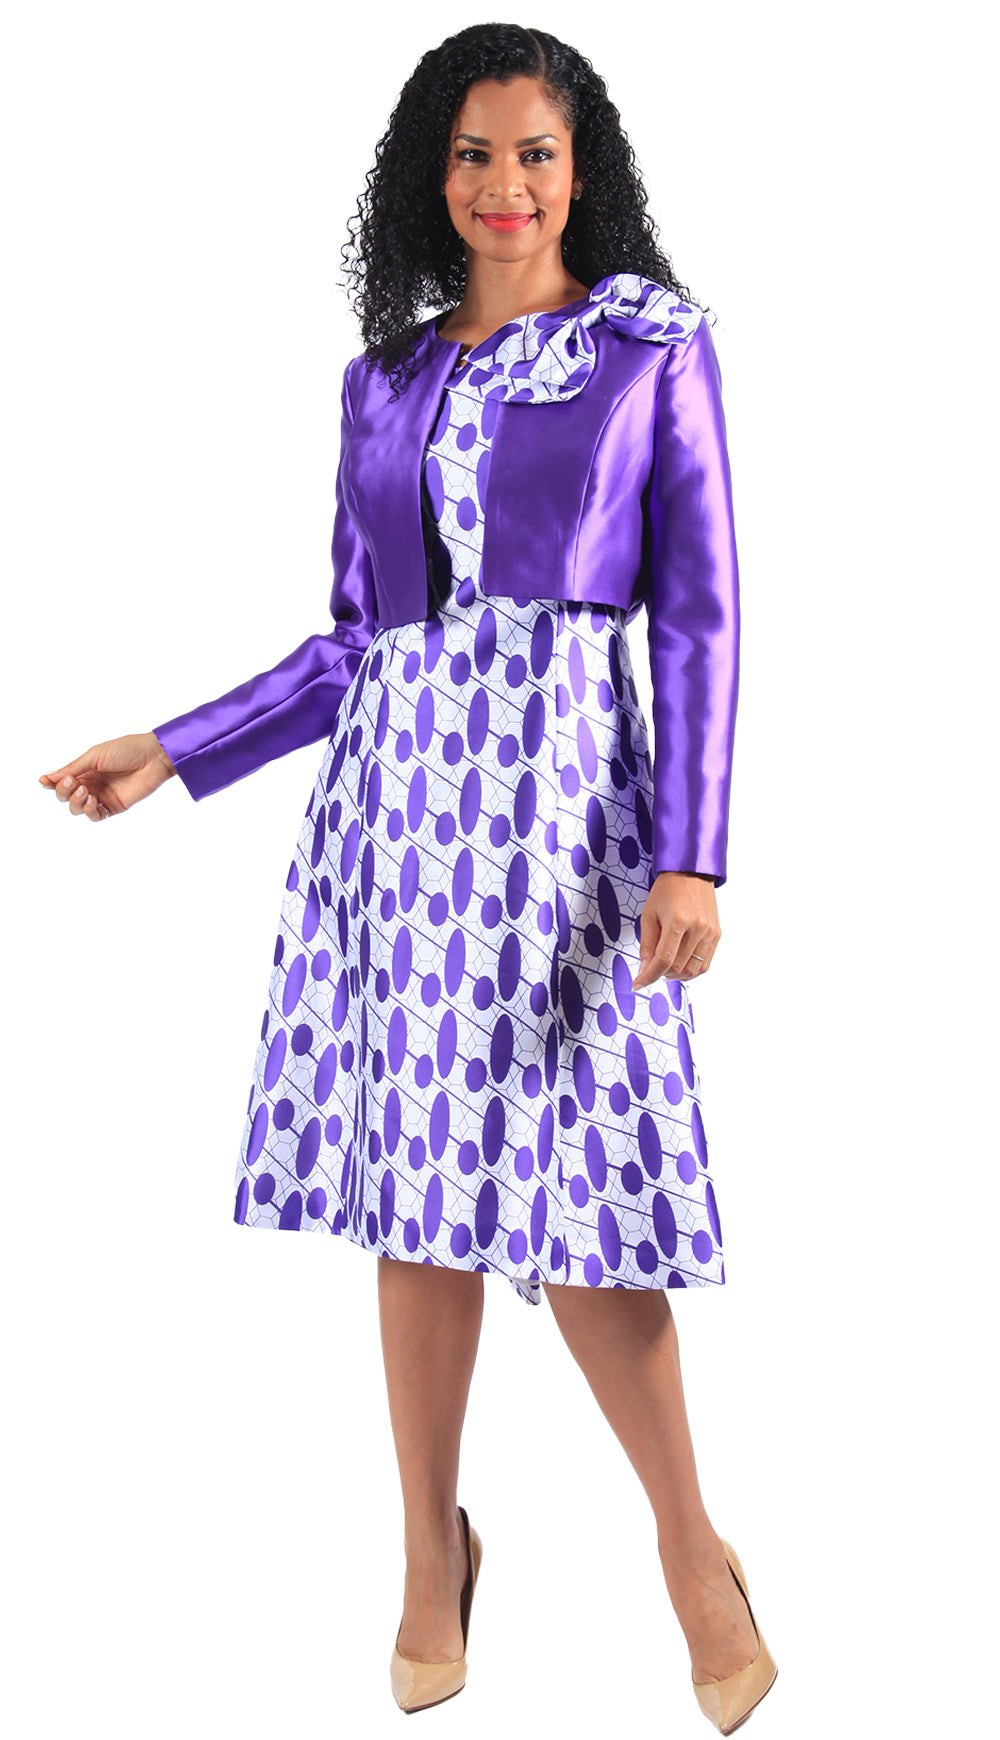 Diana Couture Dress 8615-Purple/White - Church Suits For Less